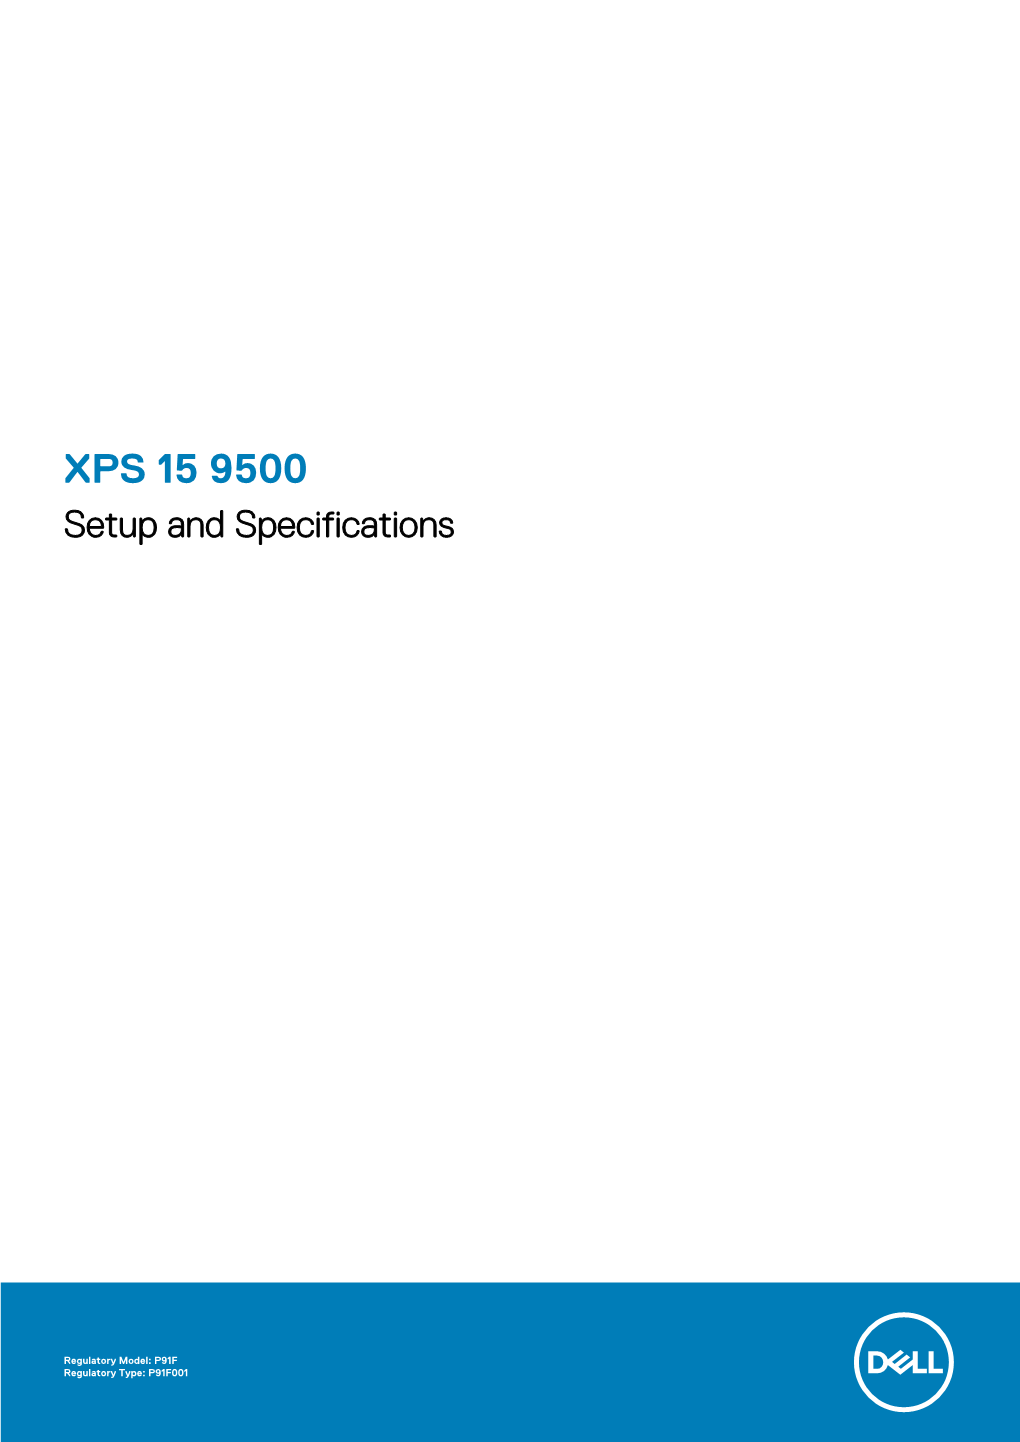 XPS 15 9500 Setup and Specifications